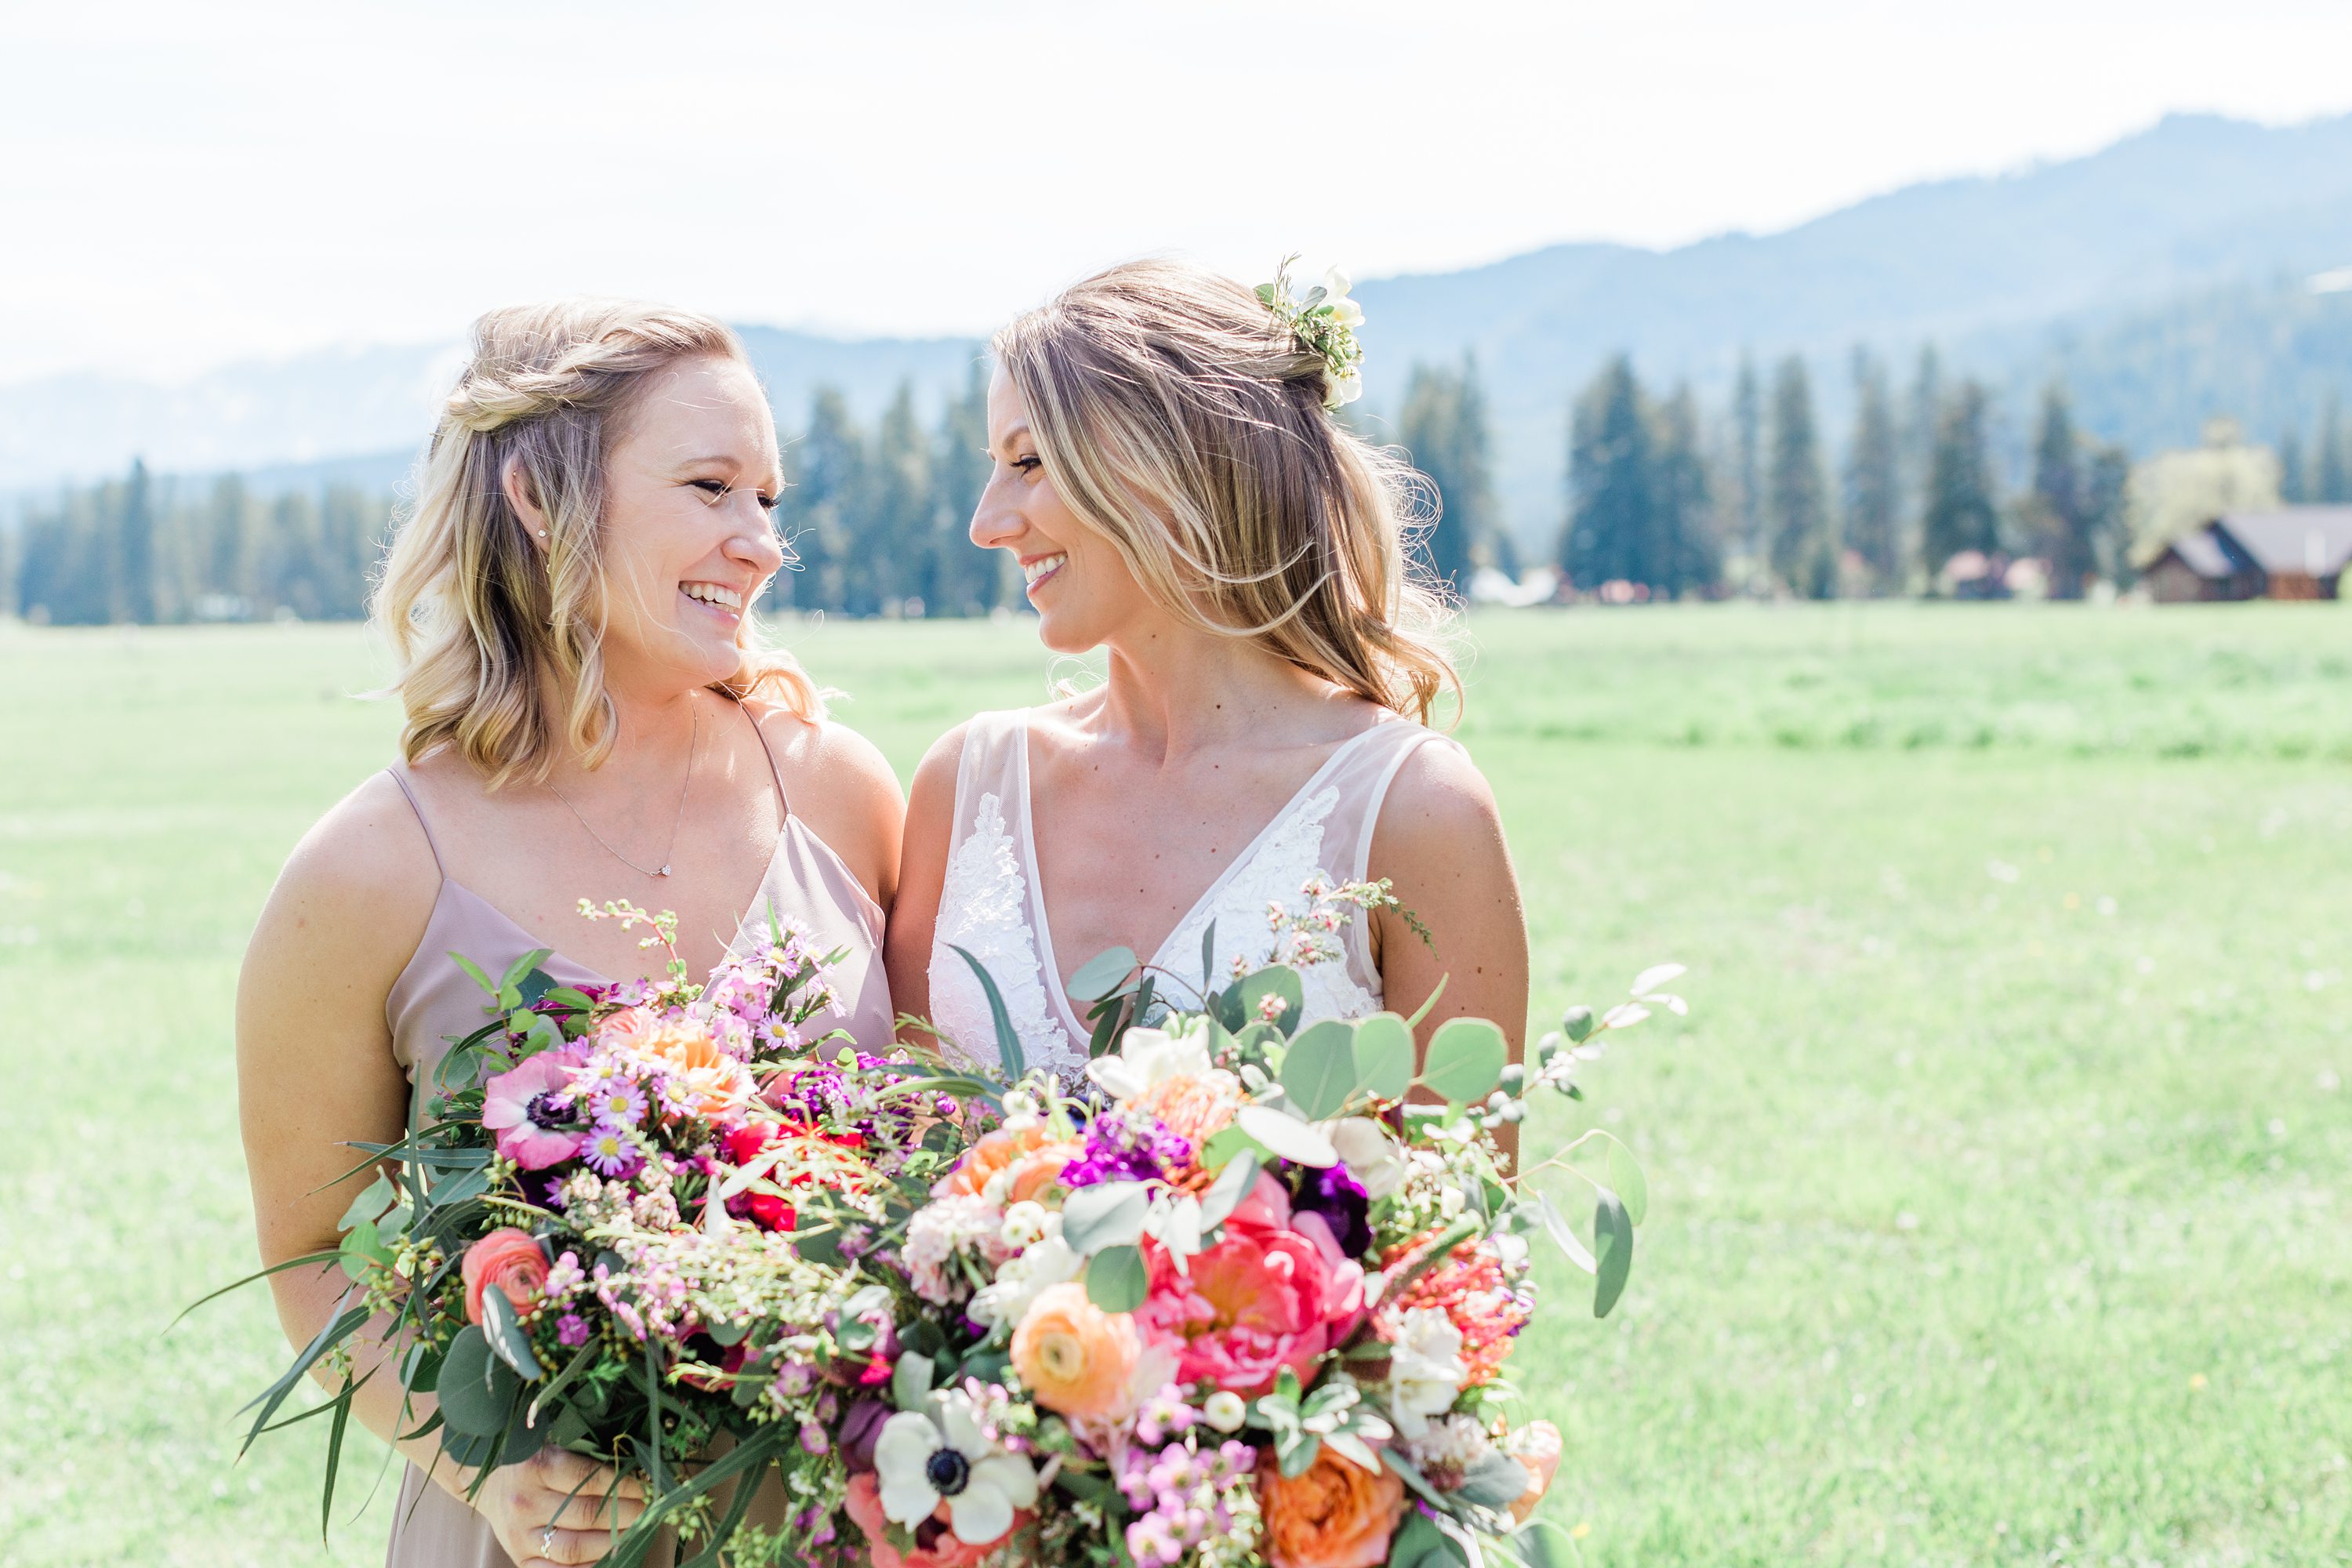 boise wedding photographer,garden valley wedding,maid of honor,maid of honor photos,bride and maid of honor